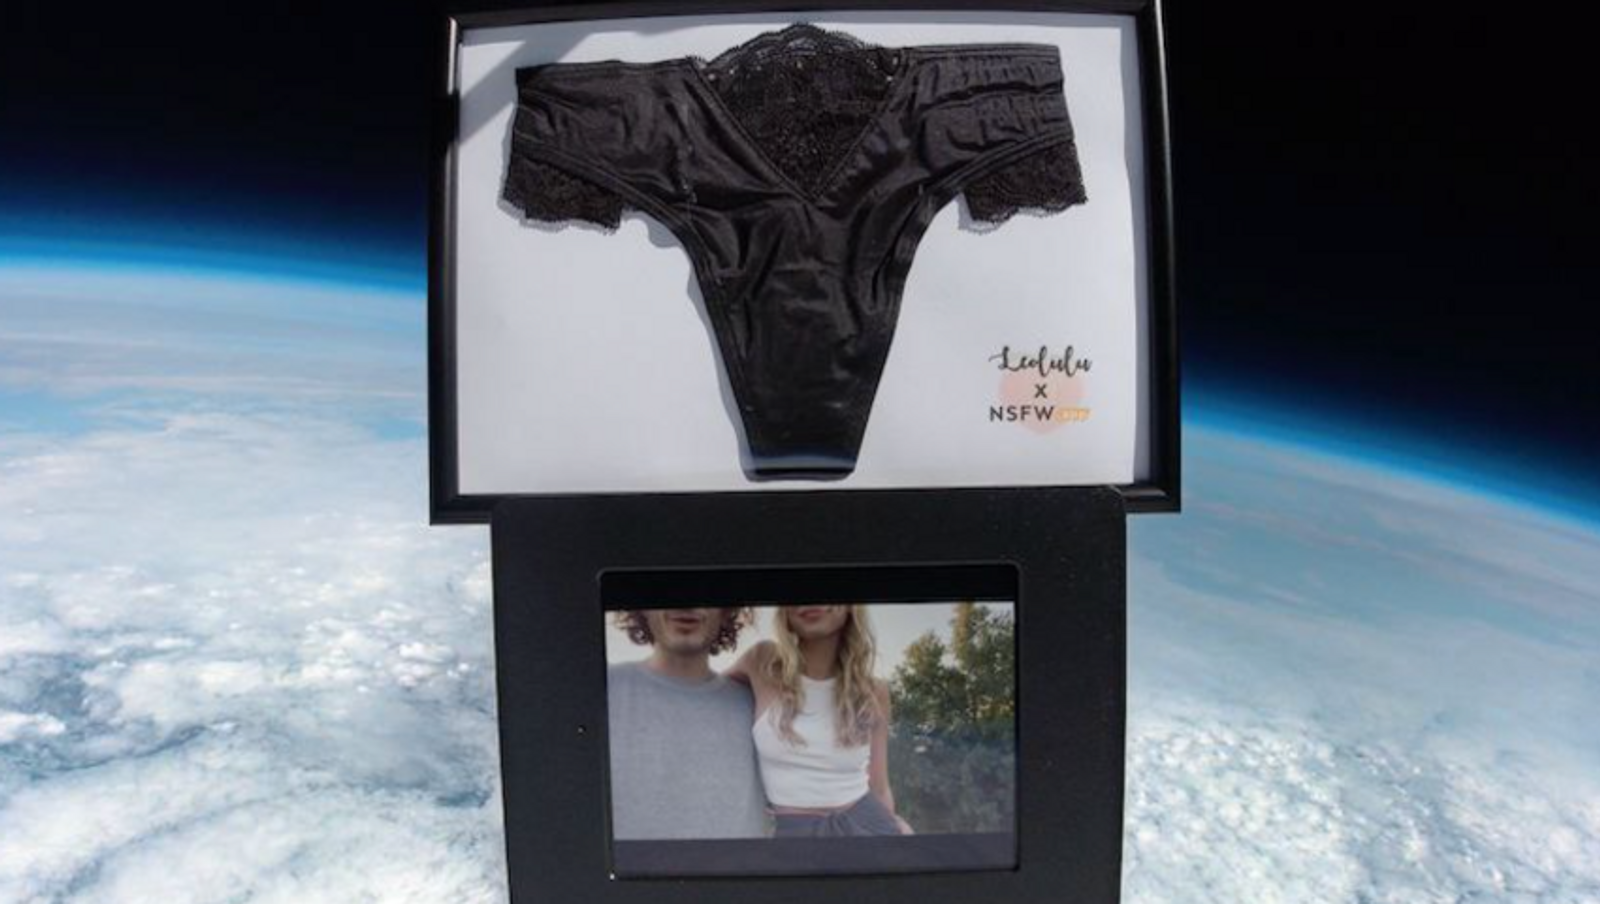 Leolulu's Panties Sent to Space for Charity Auction